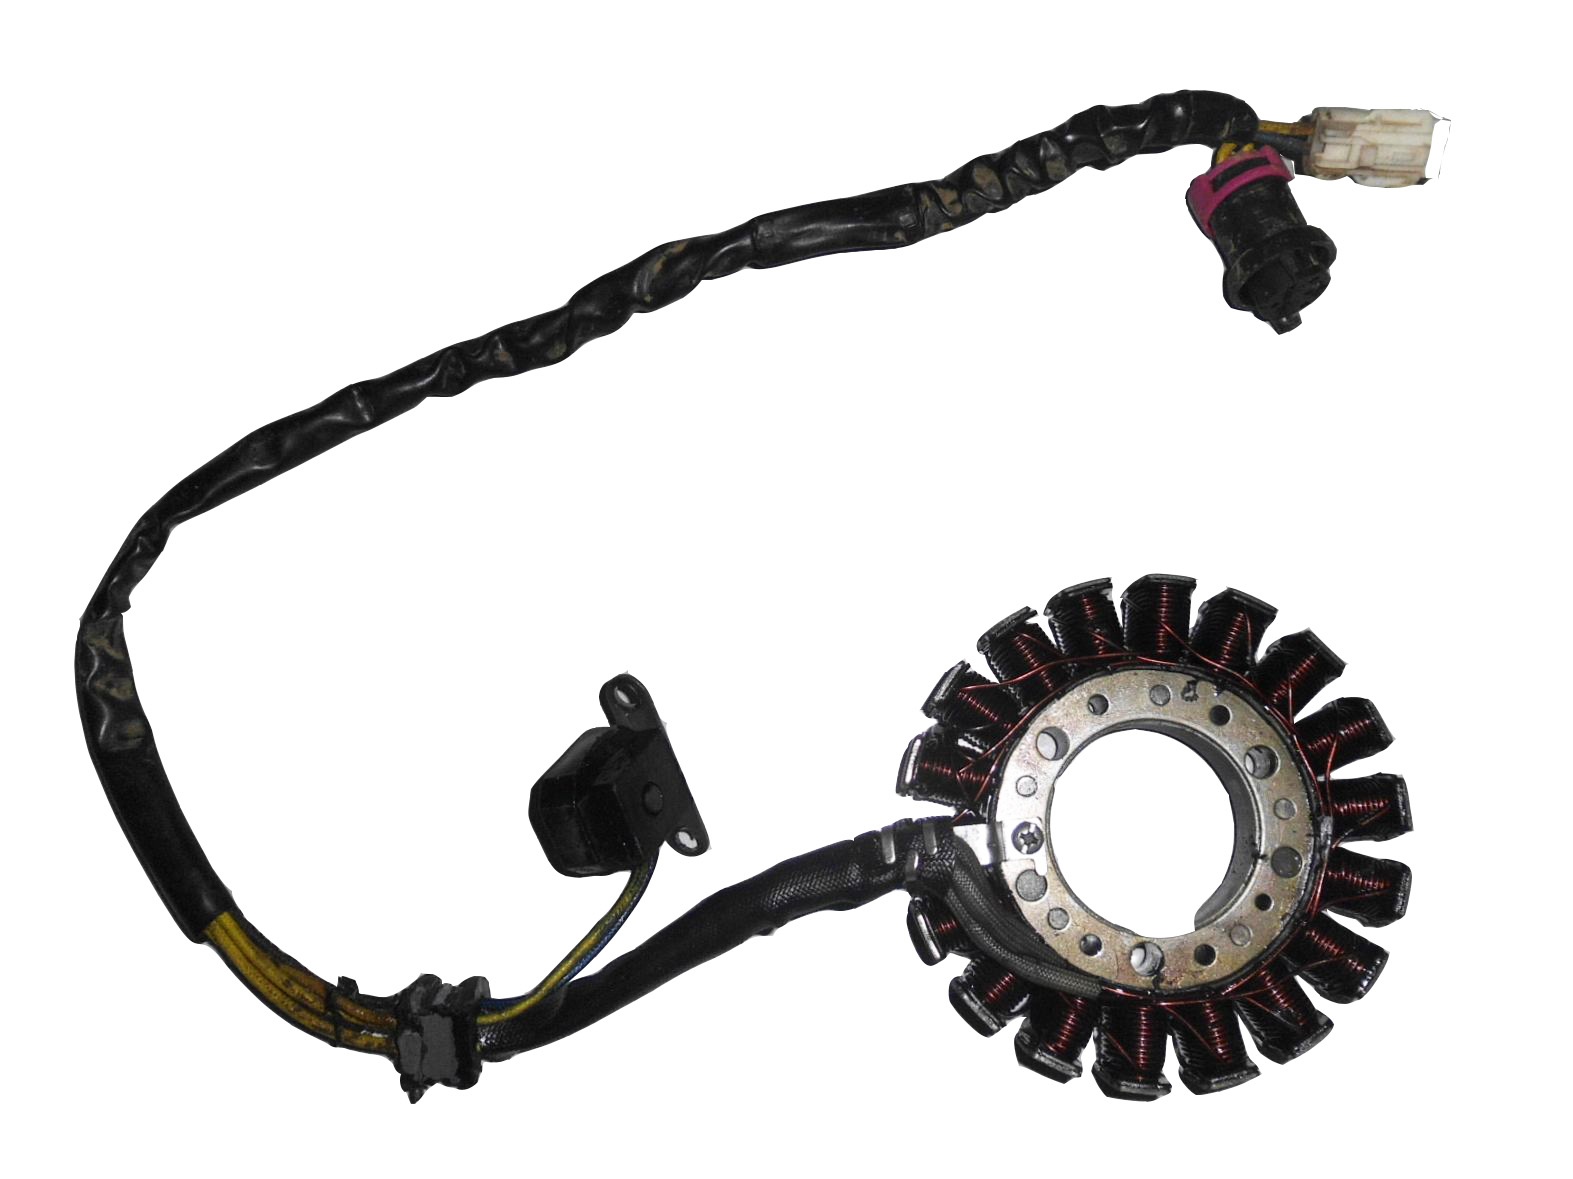 Scorpion 300 stator (different to both OB300 versions)